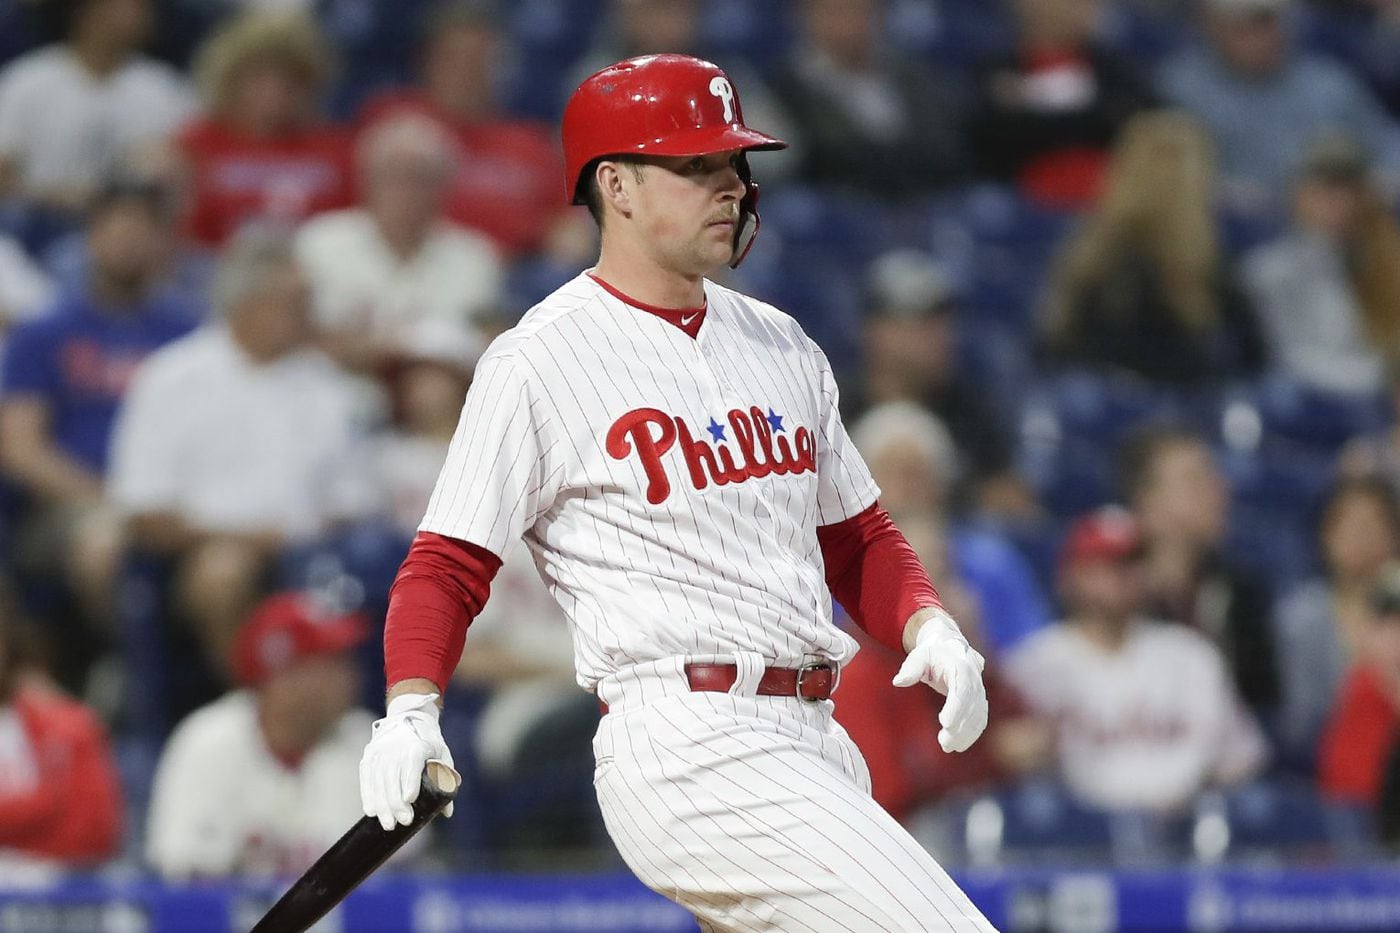 Phillies’ Rhys Hoskins seems headed back to first base | Extra Innings